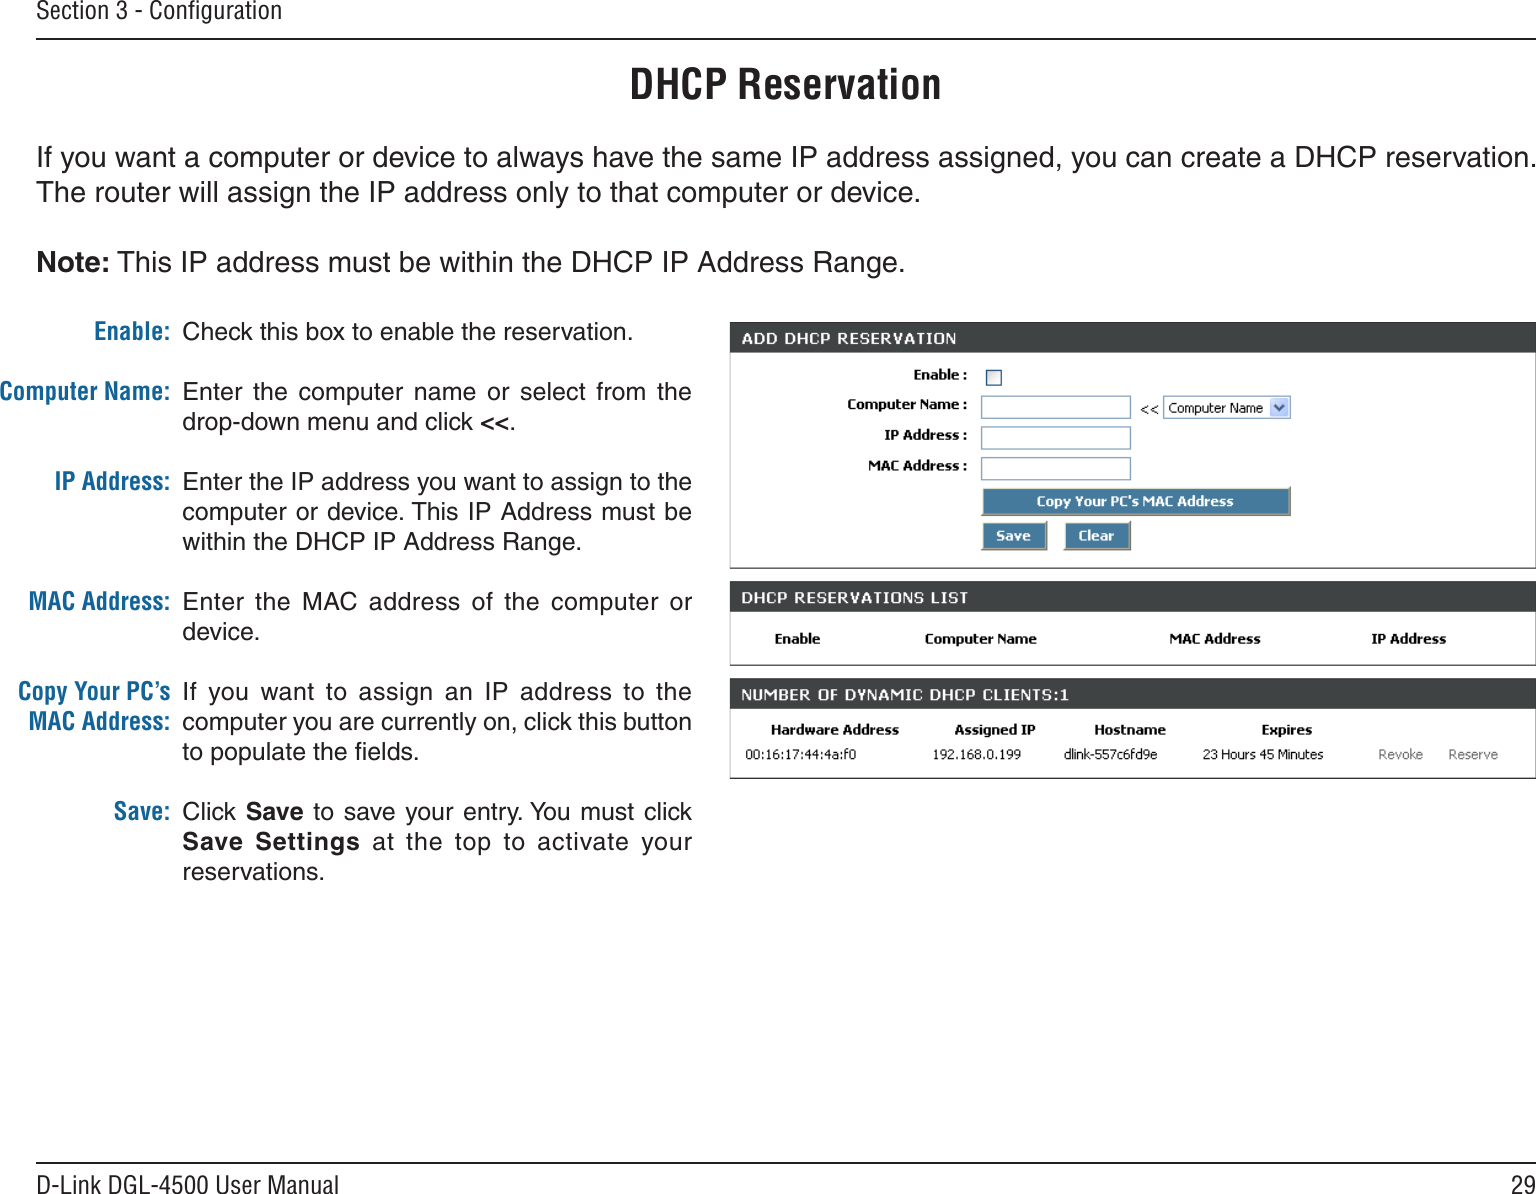 29D-Link DGL-4500 User ManualSection 3 - ConﬁgurationDHCP ReservationIf you want a computer or device to always have the same IP address assigned, you can create a DHCP reservation. The router will assign the IP address only to that computer or device. Note: This IP address must be within the DHCP IP Address Range.Check this box to enable the reservation.Enter  the  computer  name  or  select  from  the drop-down menu and click &lt;&lt;.Enter the IP address you want to assign to the computer or device. This IP Address must be within the DHCP IP Address Range.Enter  the  MAC  address  of  the  computer  or device.If  you  want  to  assign  an  IP  address  to  the computer you are currently on, click this button to populate the ﬁelds. Click Save to save your  entry. You must click Save  Settings  at  the  top  to  activate  your reservations. Enable:Computer Name:IP Address:MAC Address:Copy Your PC’s MAC Address:Save: